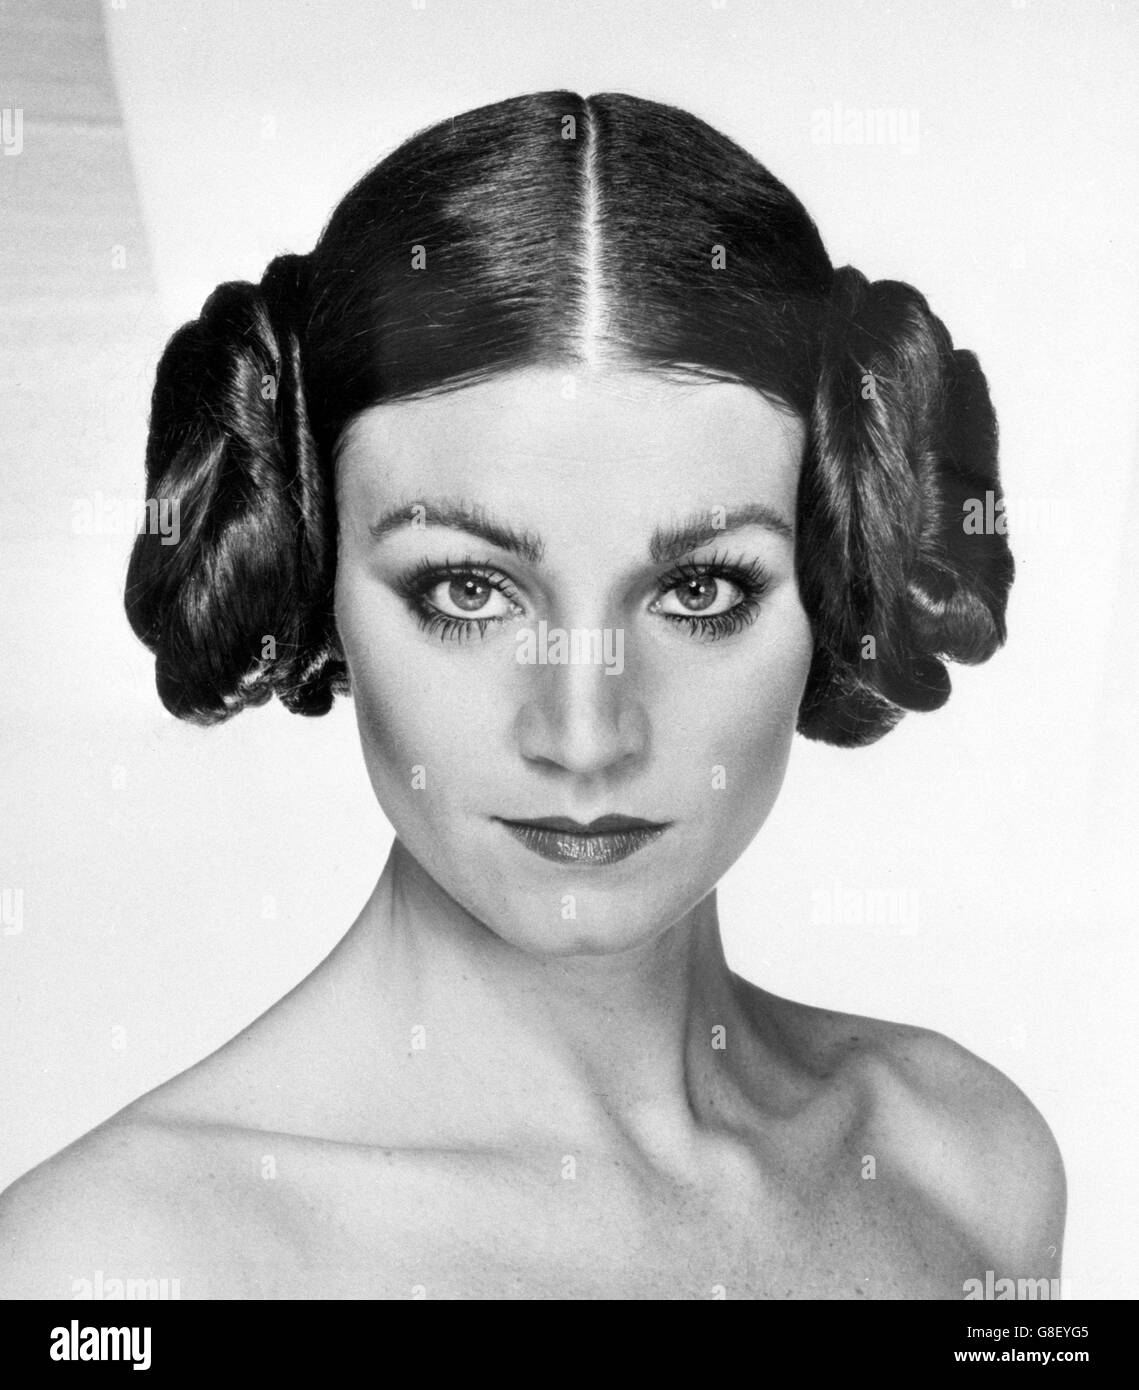 Sunsilk's recreation of the hairstyle worn by Hollywood's Carrie Fisher in the sci-fi film 'Star Wars'. The style was created by hairdresser Nicholas French. Stock Photo